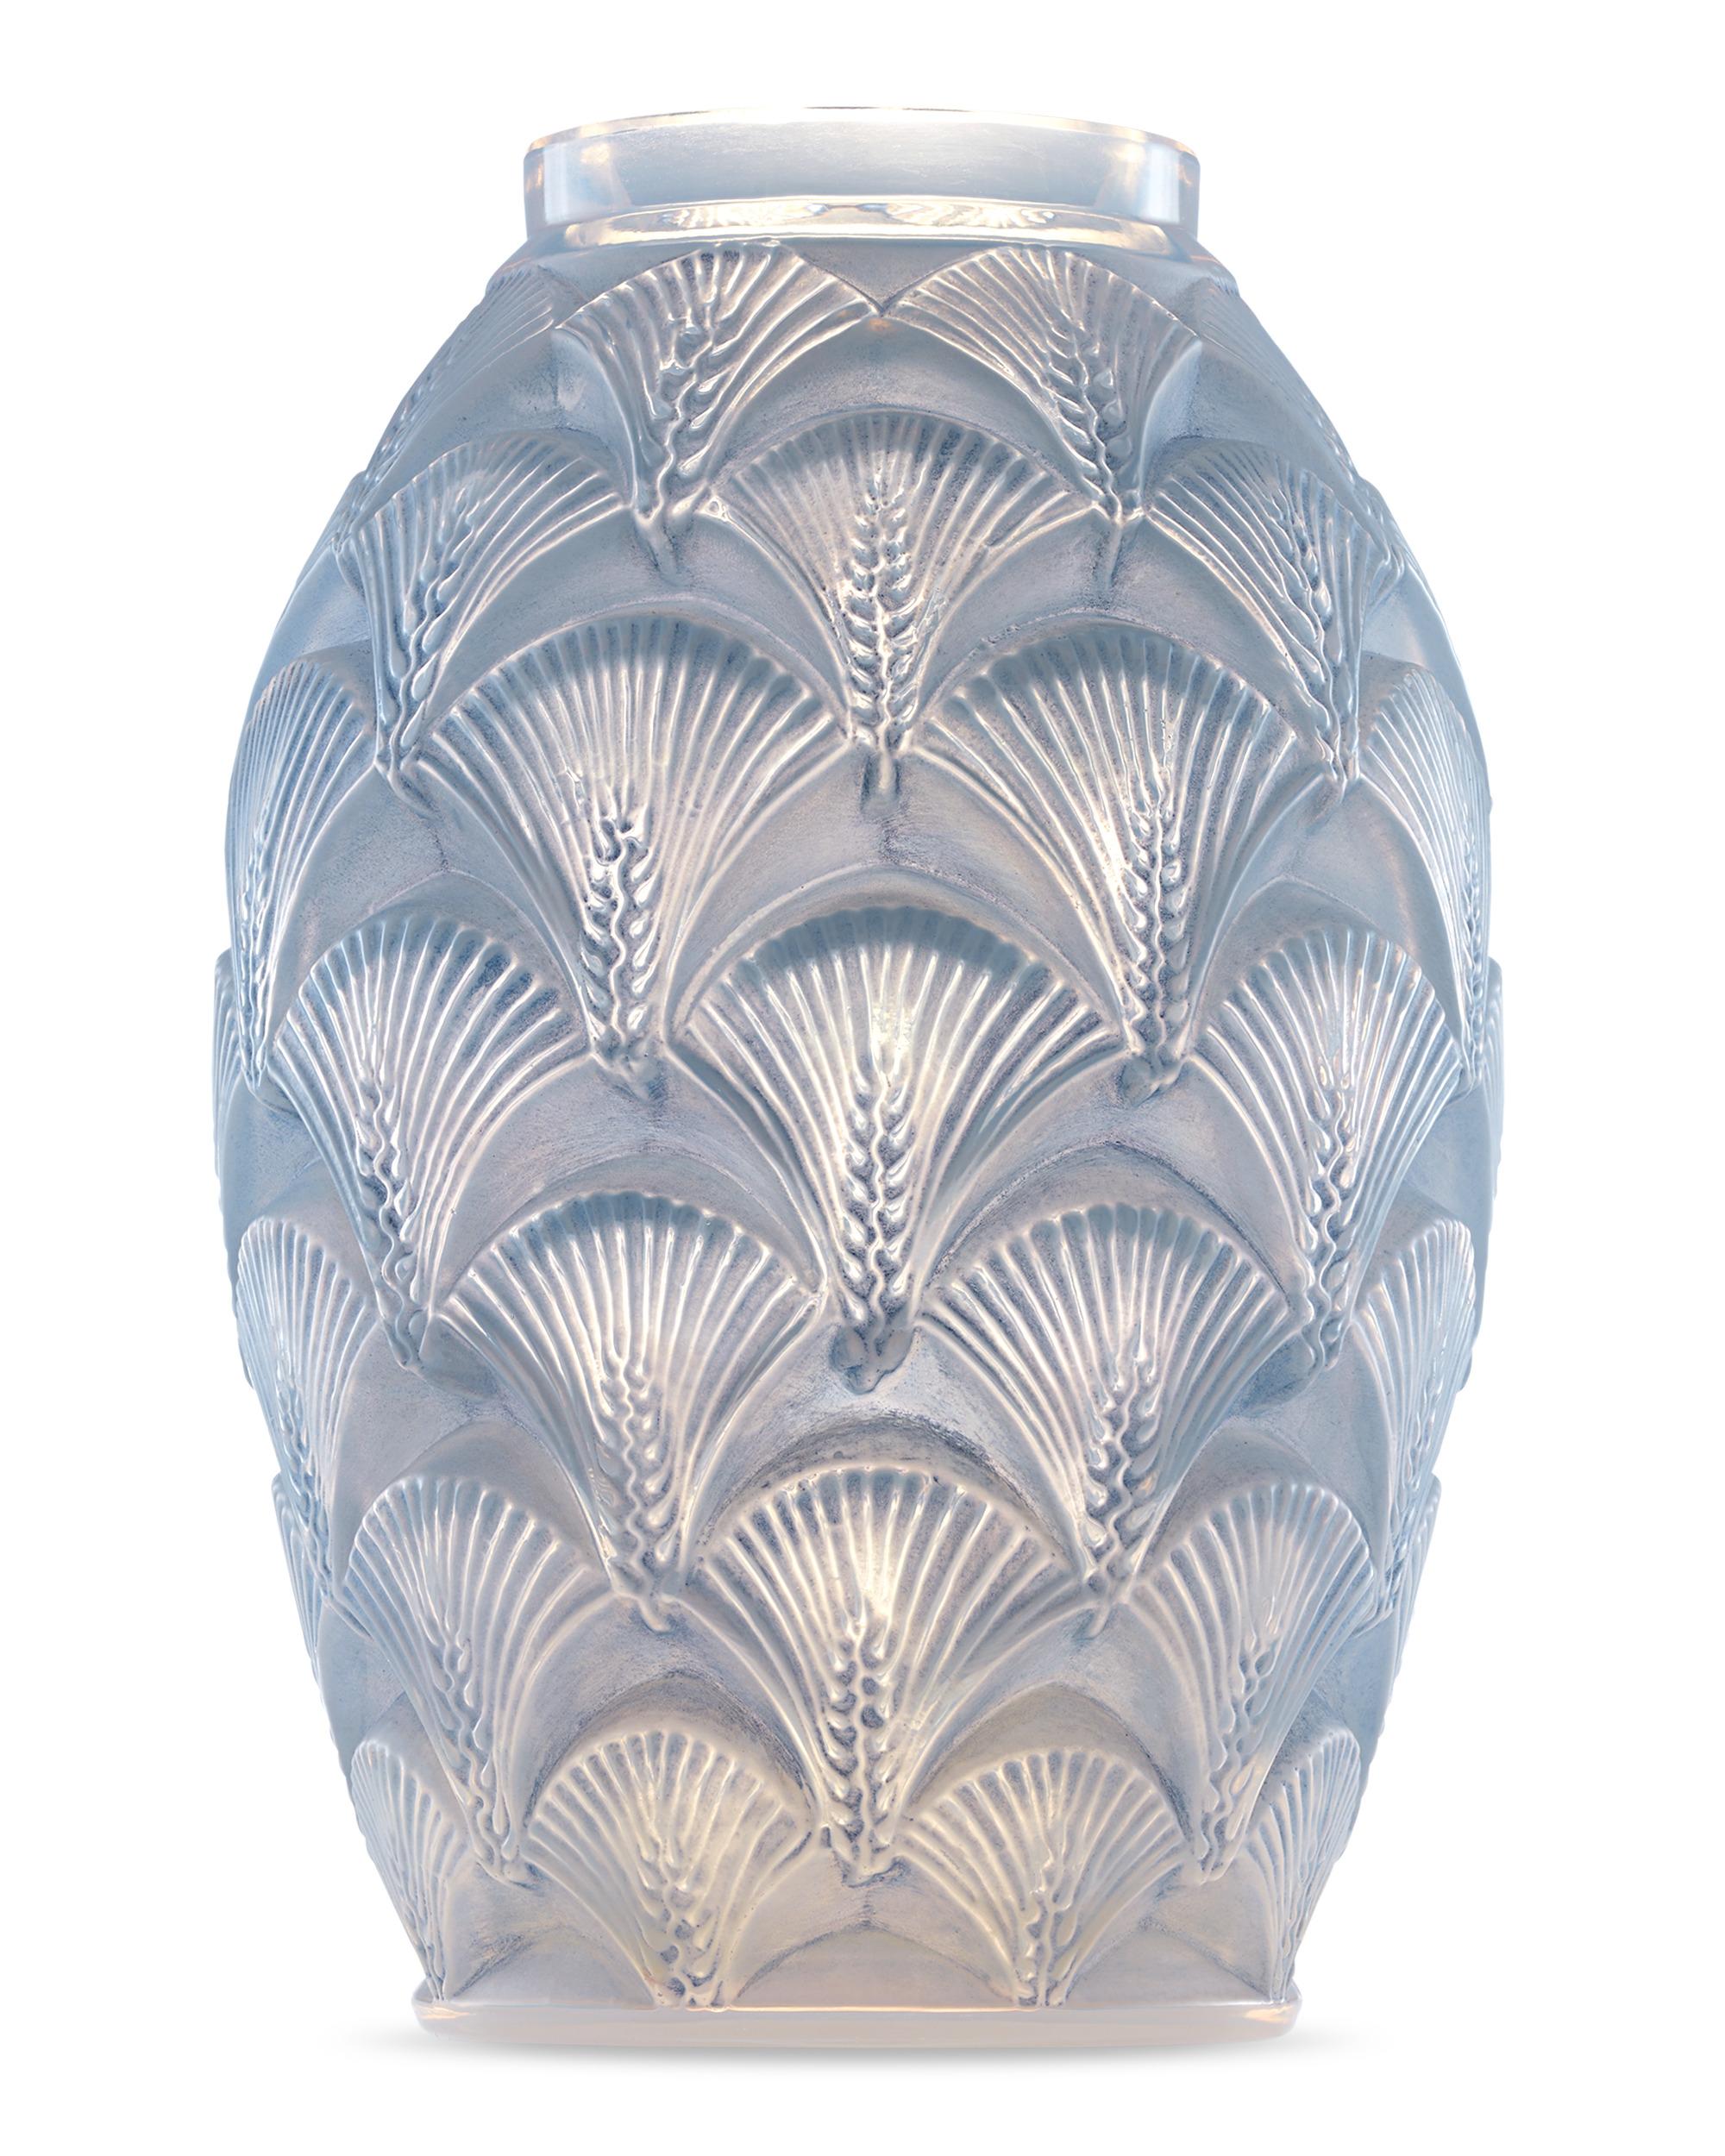 The work of famed French glass master René Lalique, this dynamic vase is crafted in the rare and intricate Herblay pattern. Conceived in 1932 during the height of Art Deco, its design is formed from opalescent, blue stained glass that features an